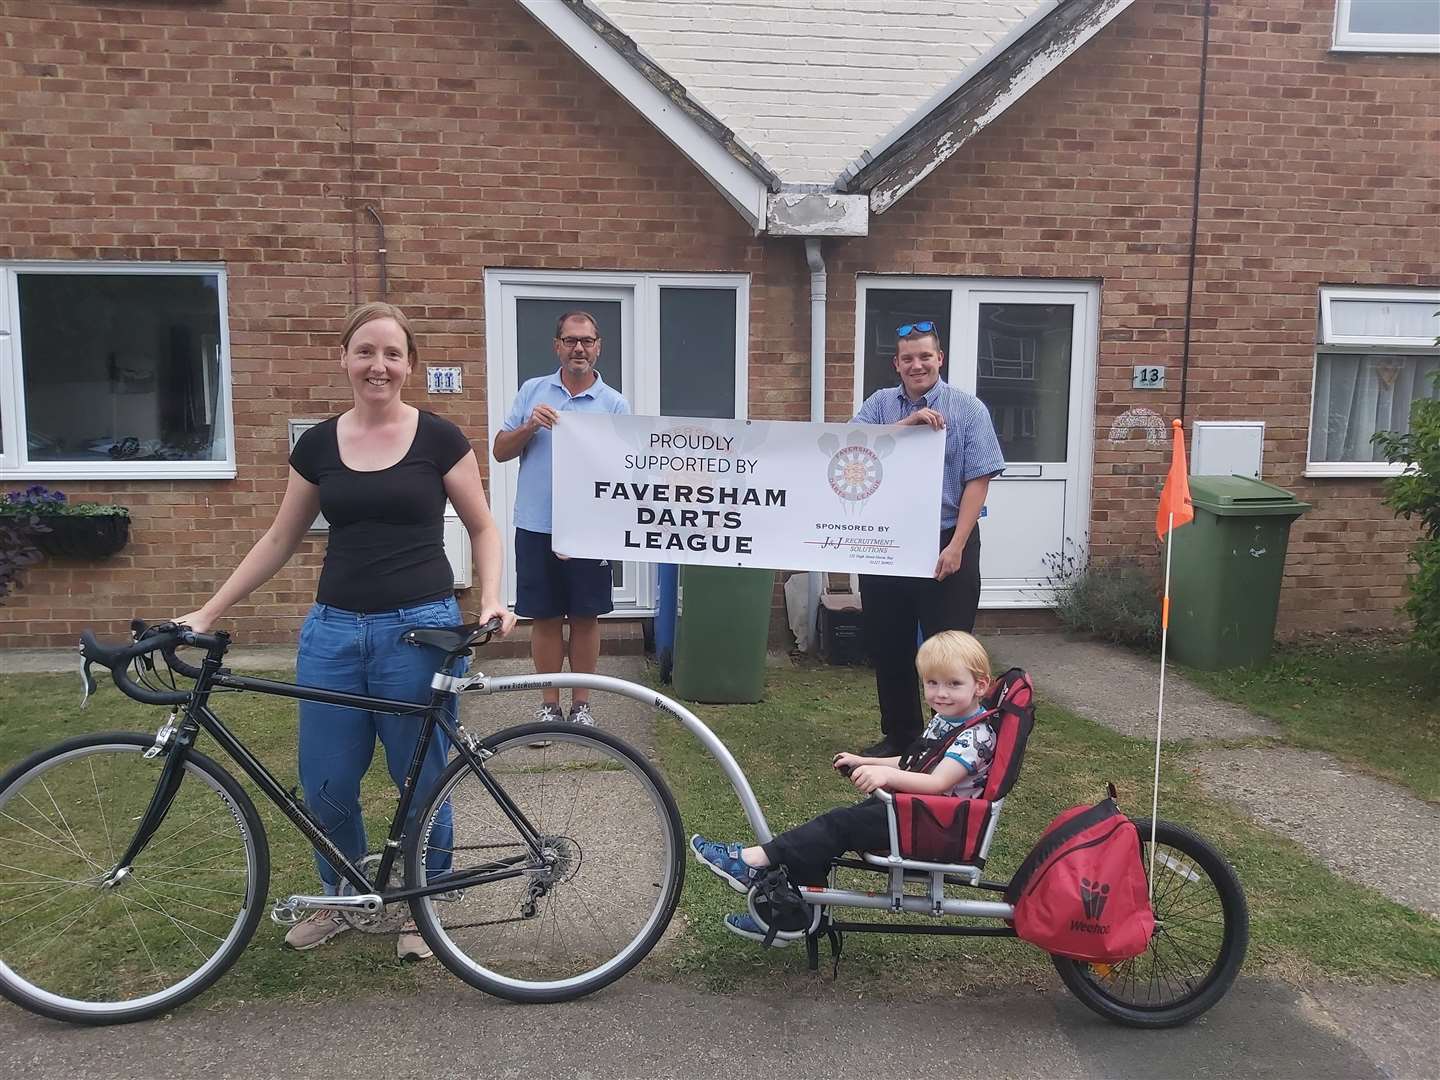 Kerry Pearce, from Faversham, had cycled to Seasalter with her three-year-old son Alfred. Pictured with new trailer donated by the Faversham Darts League